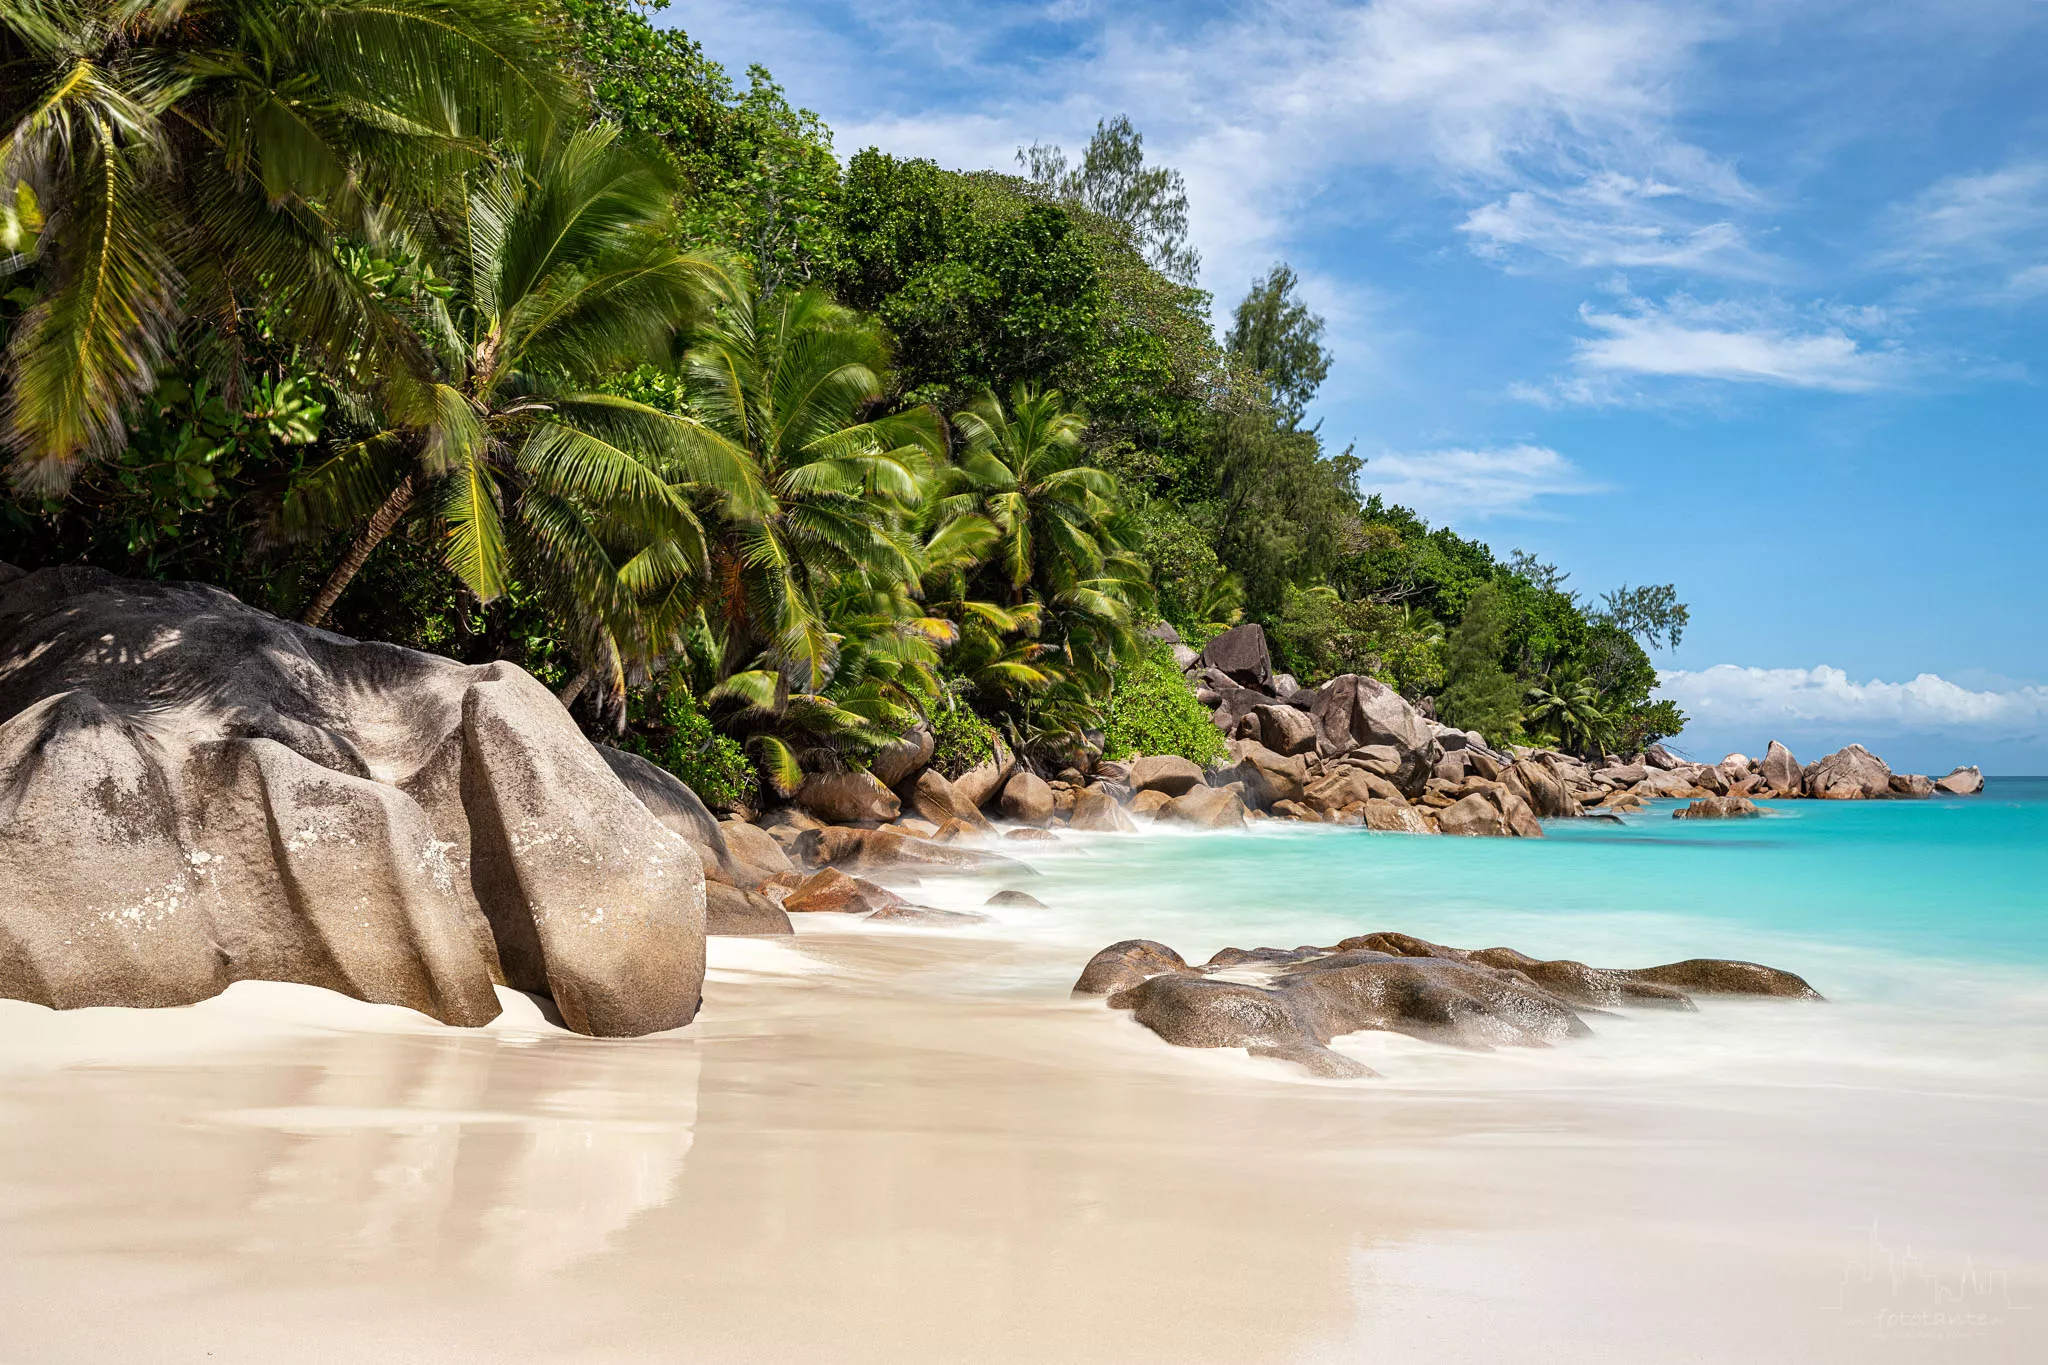 Anse Lazio & Anse Georgette Trail in Republic of Seychelles, Africa | Trekking & Hiking - Rated 0.9